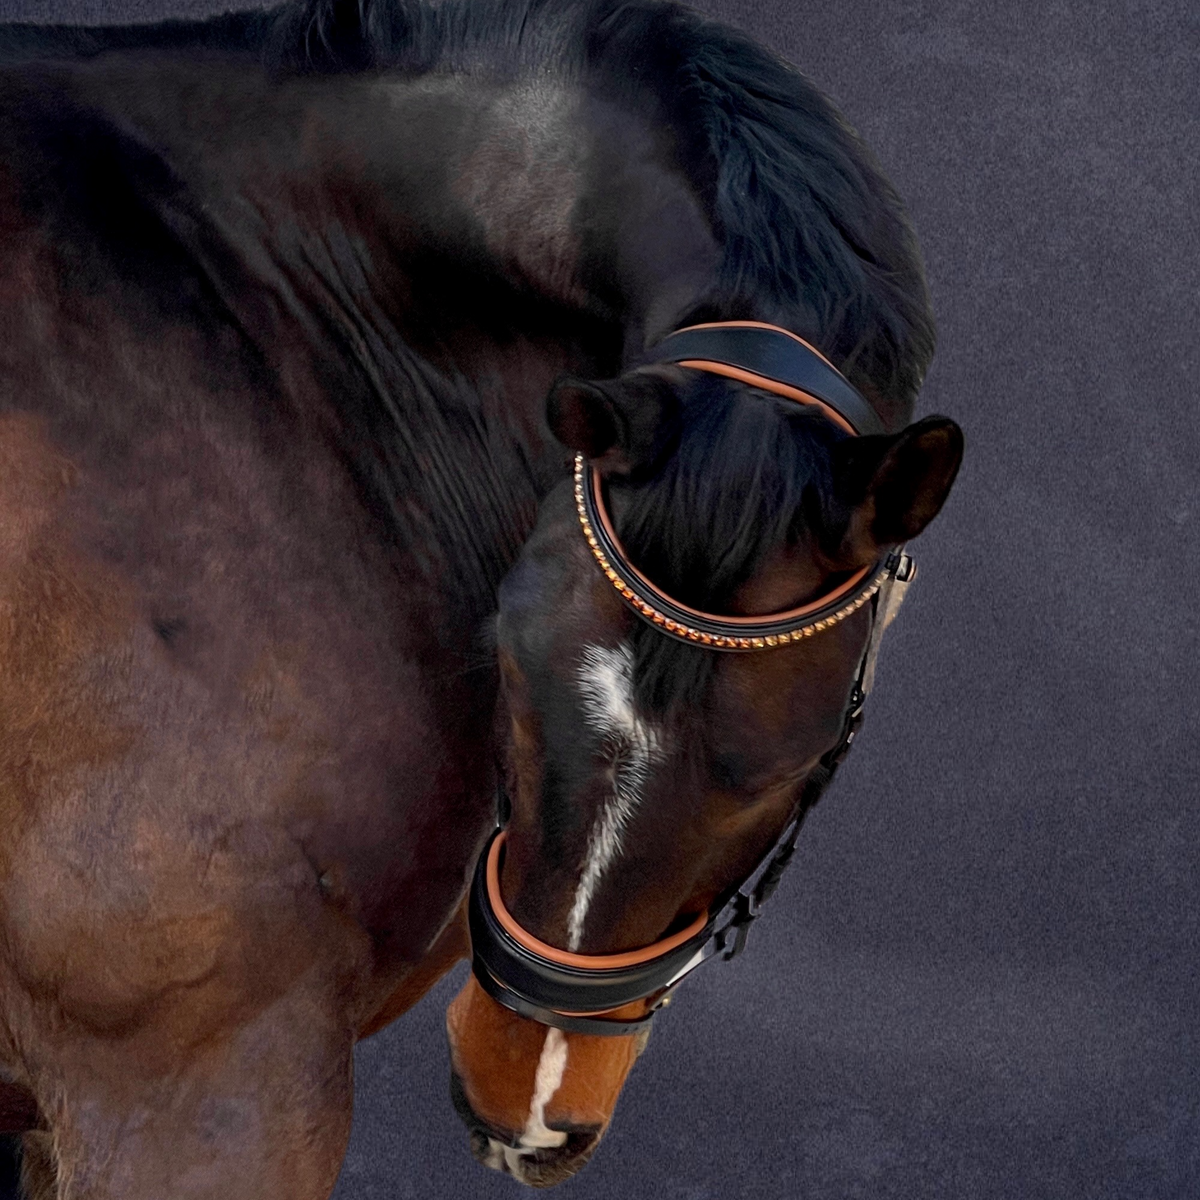 The Tuscany Black Leather Rolled Leather Snaffle Bridle with Flash